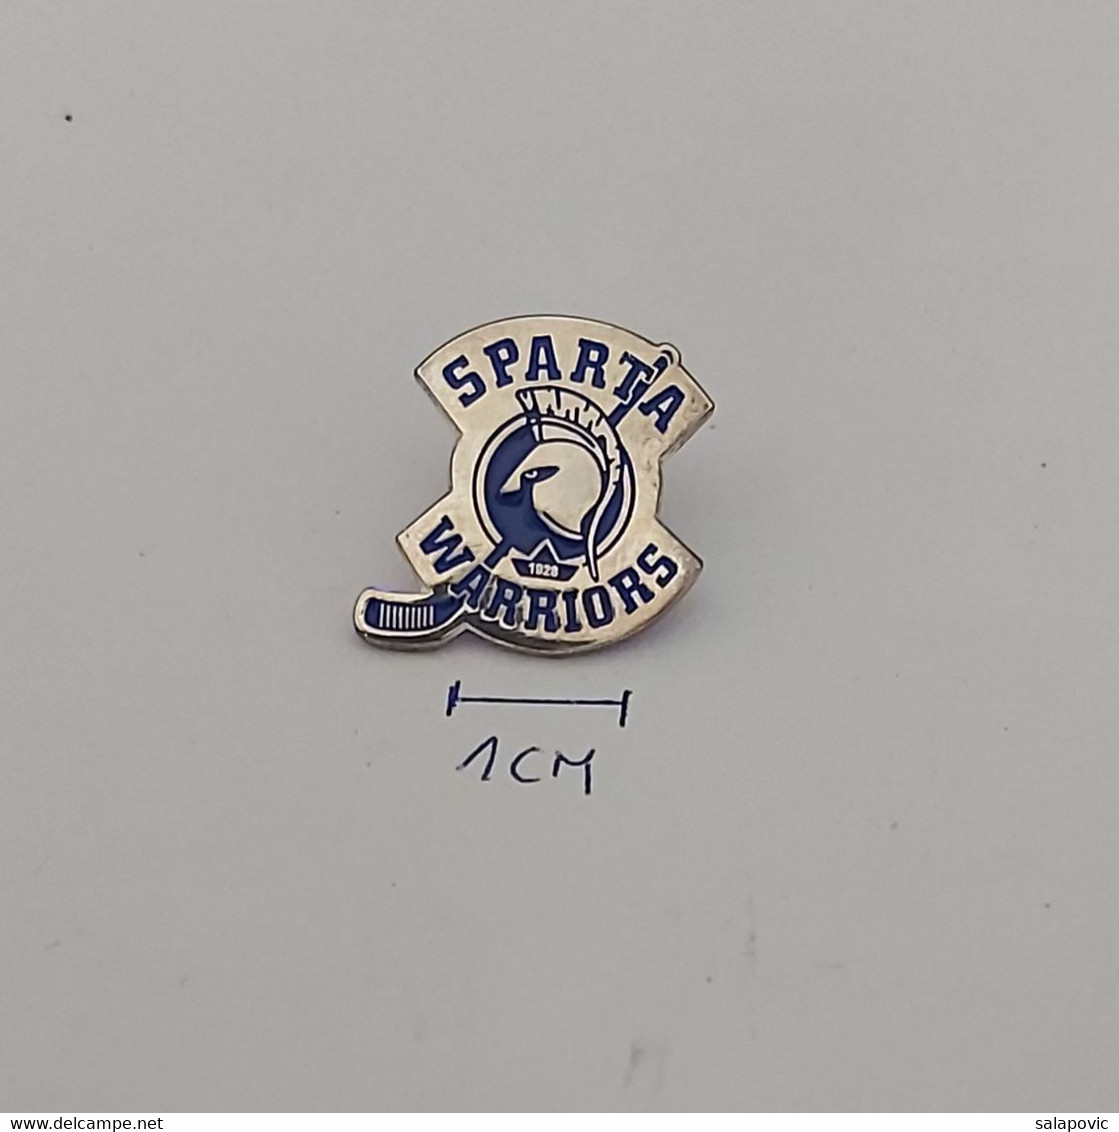 Sparta Warriors Ice Hockey Club Norway PINS A10/5 - Sports D'hiver